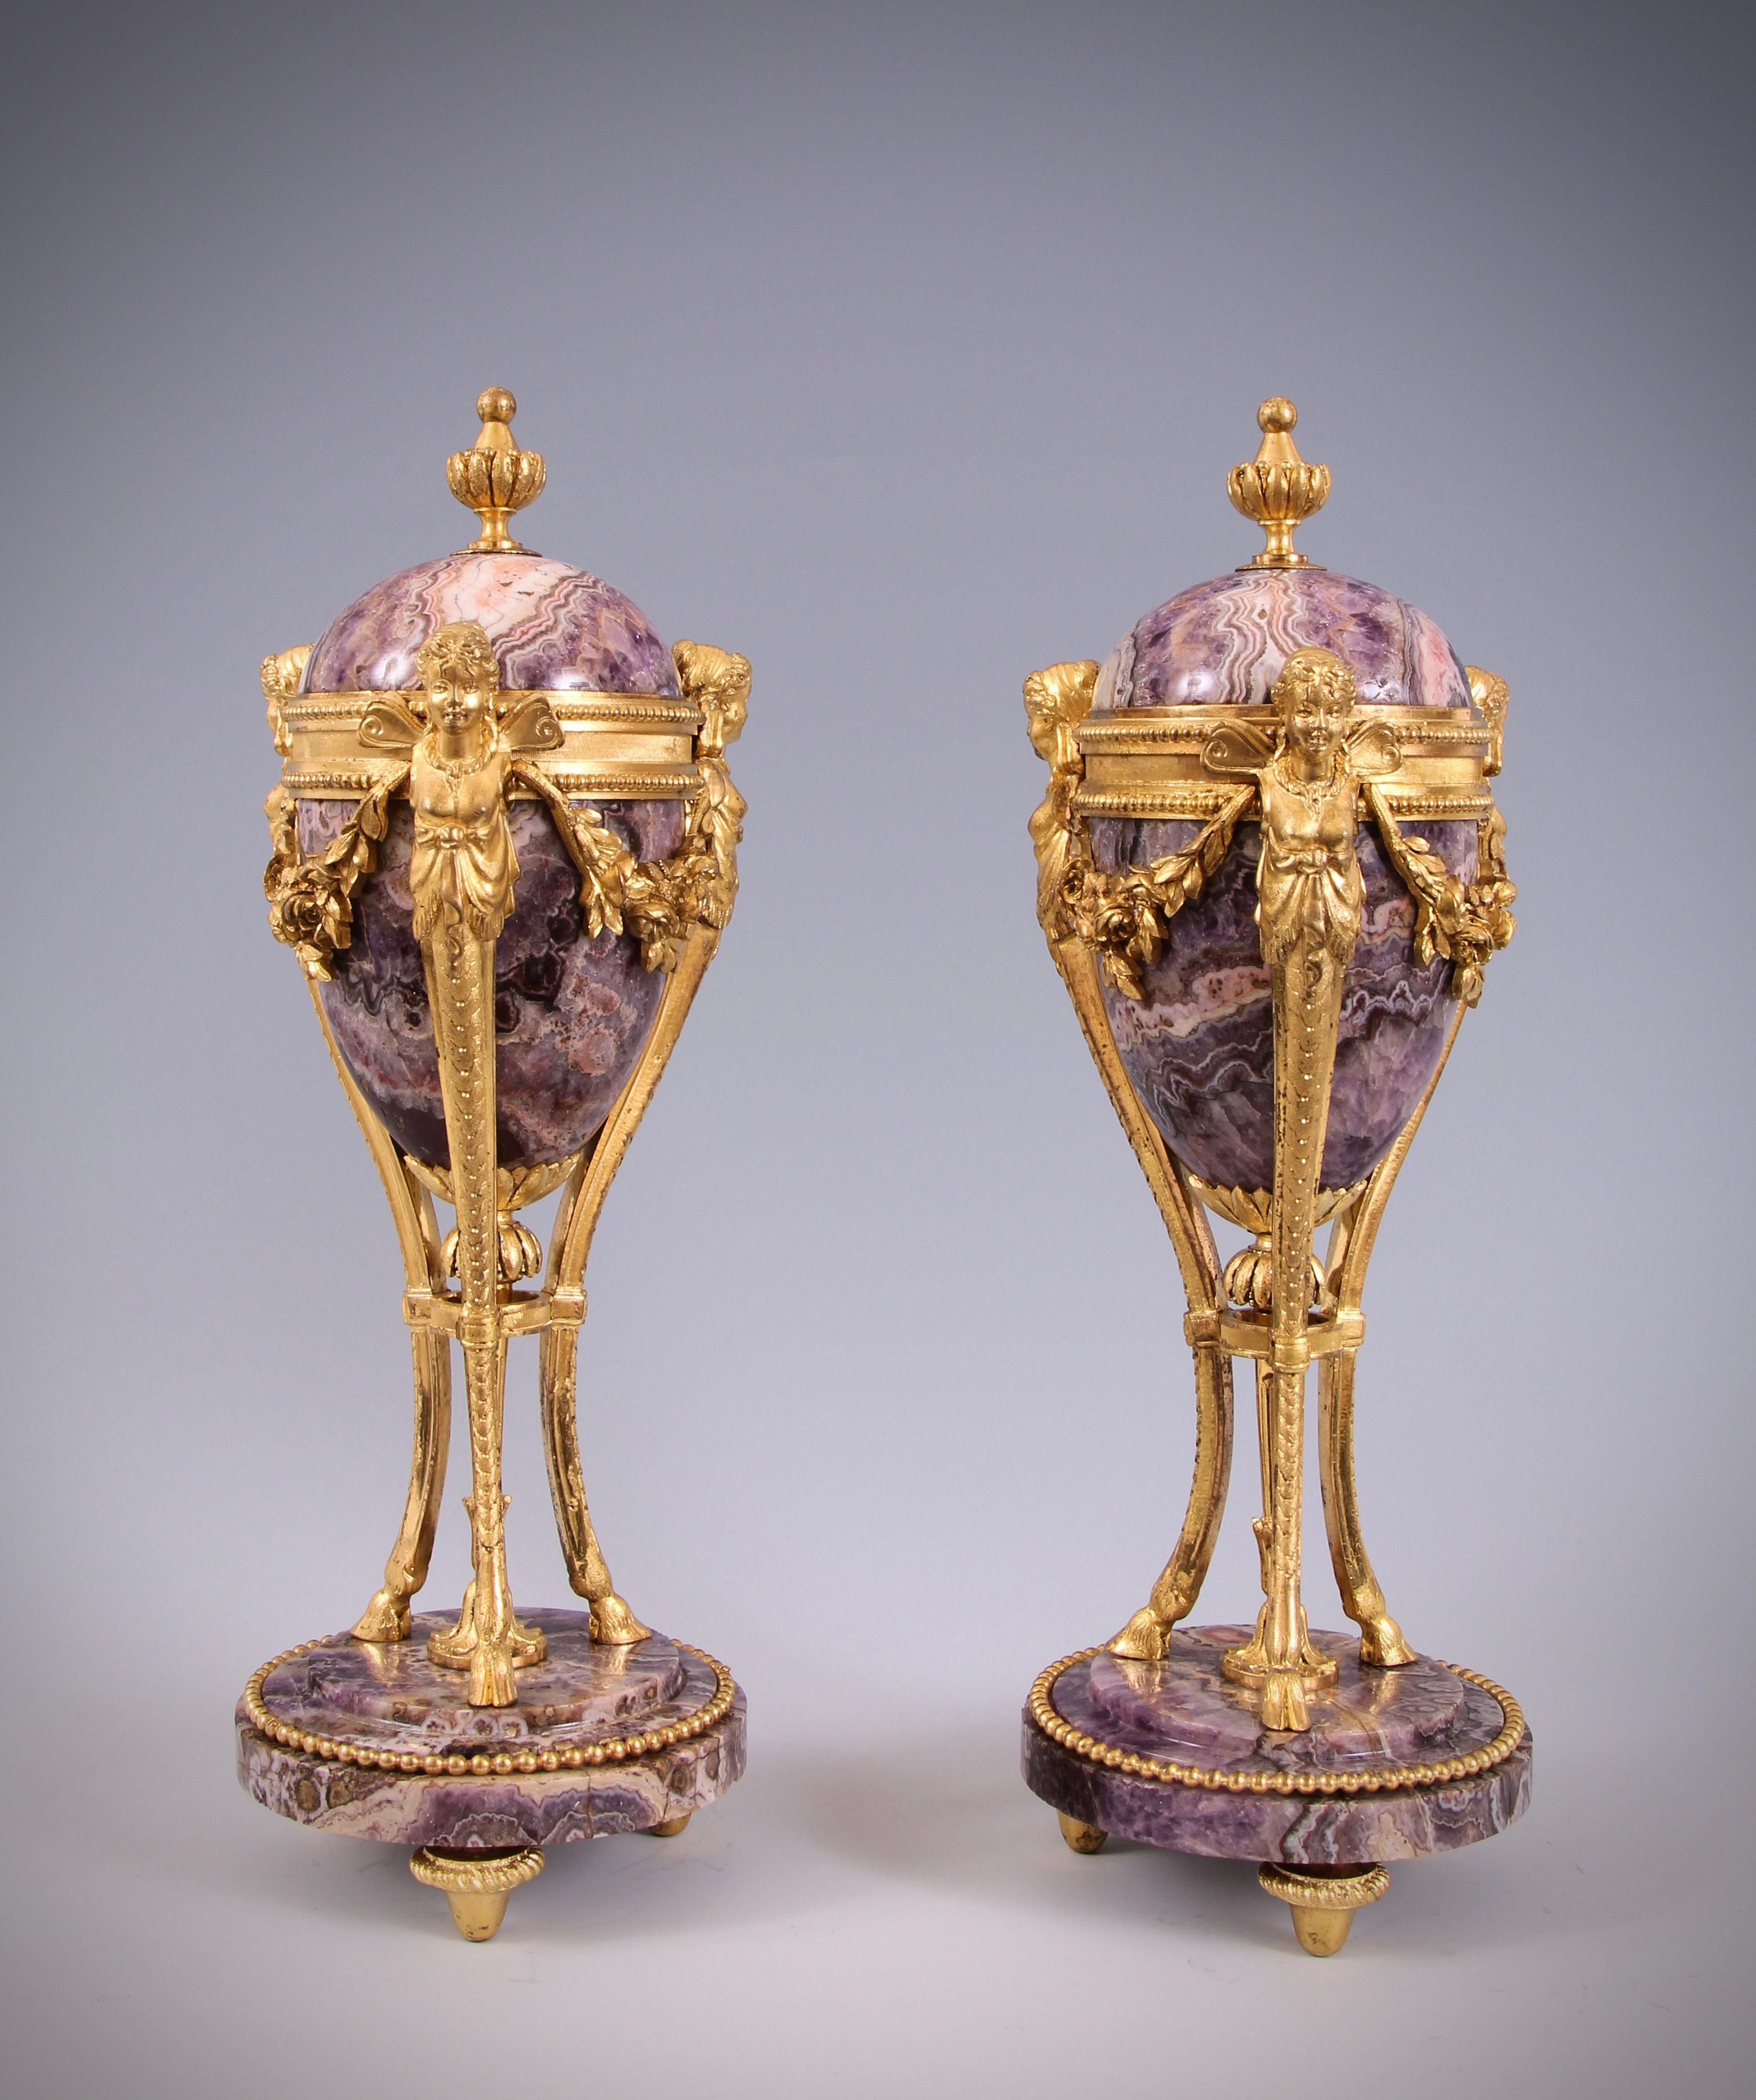 Sculpted from Amethyst, two of the most majestic, palatial and incredibly rare cassolettes created

Exceptionally rare pair of Louis XVI gilt bronze and Amethyst cassolettes.The rarity of this majestic pair cannot be overstated, they are without